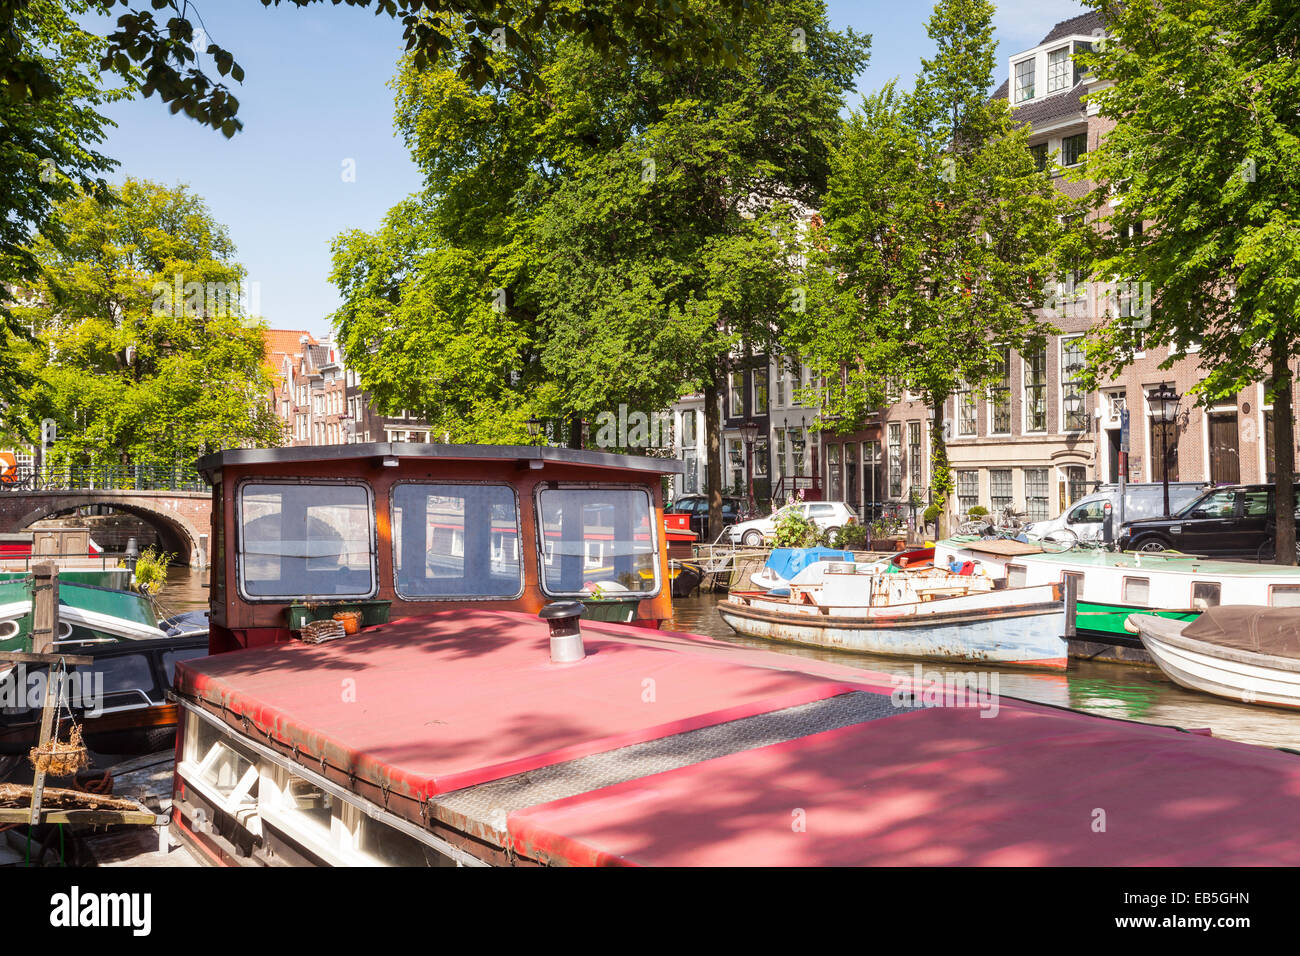 The Keizersgracht canal in Amsterdam. The area is designated as a World Heritage Site by UNESCO. Stock Photo